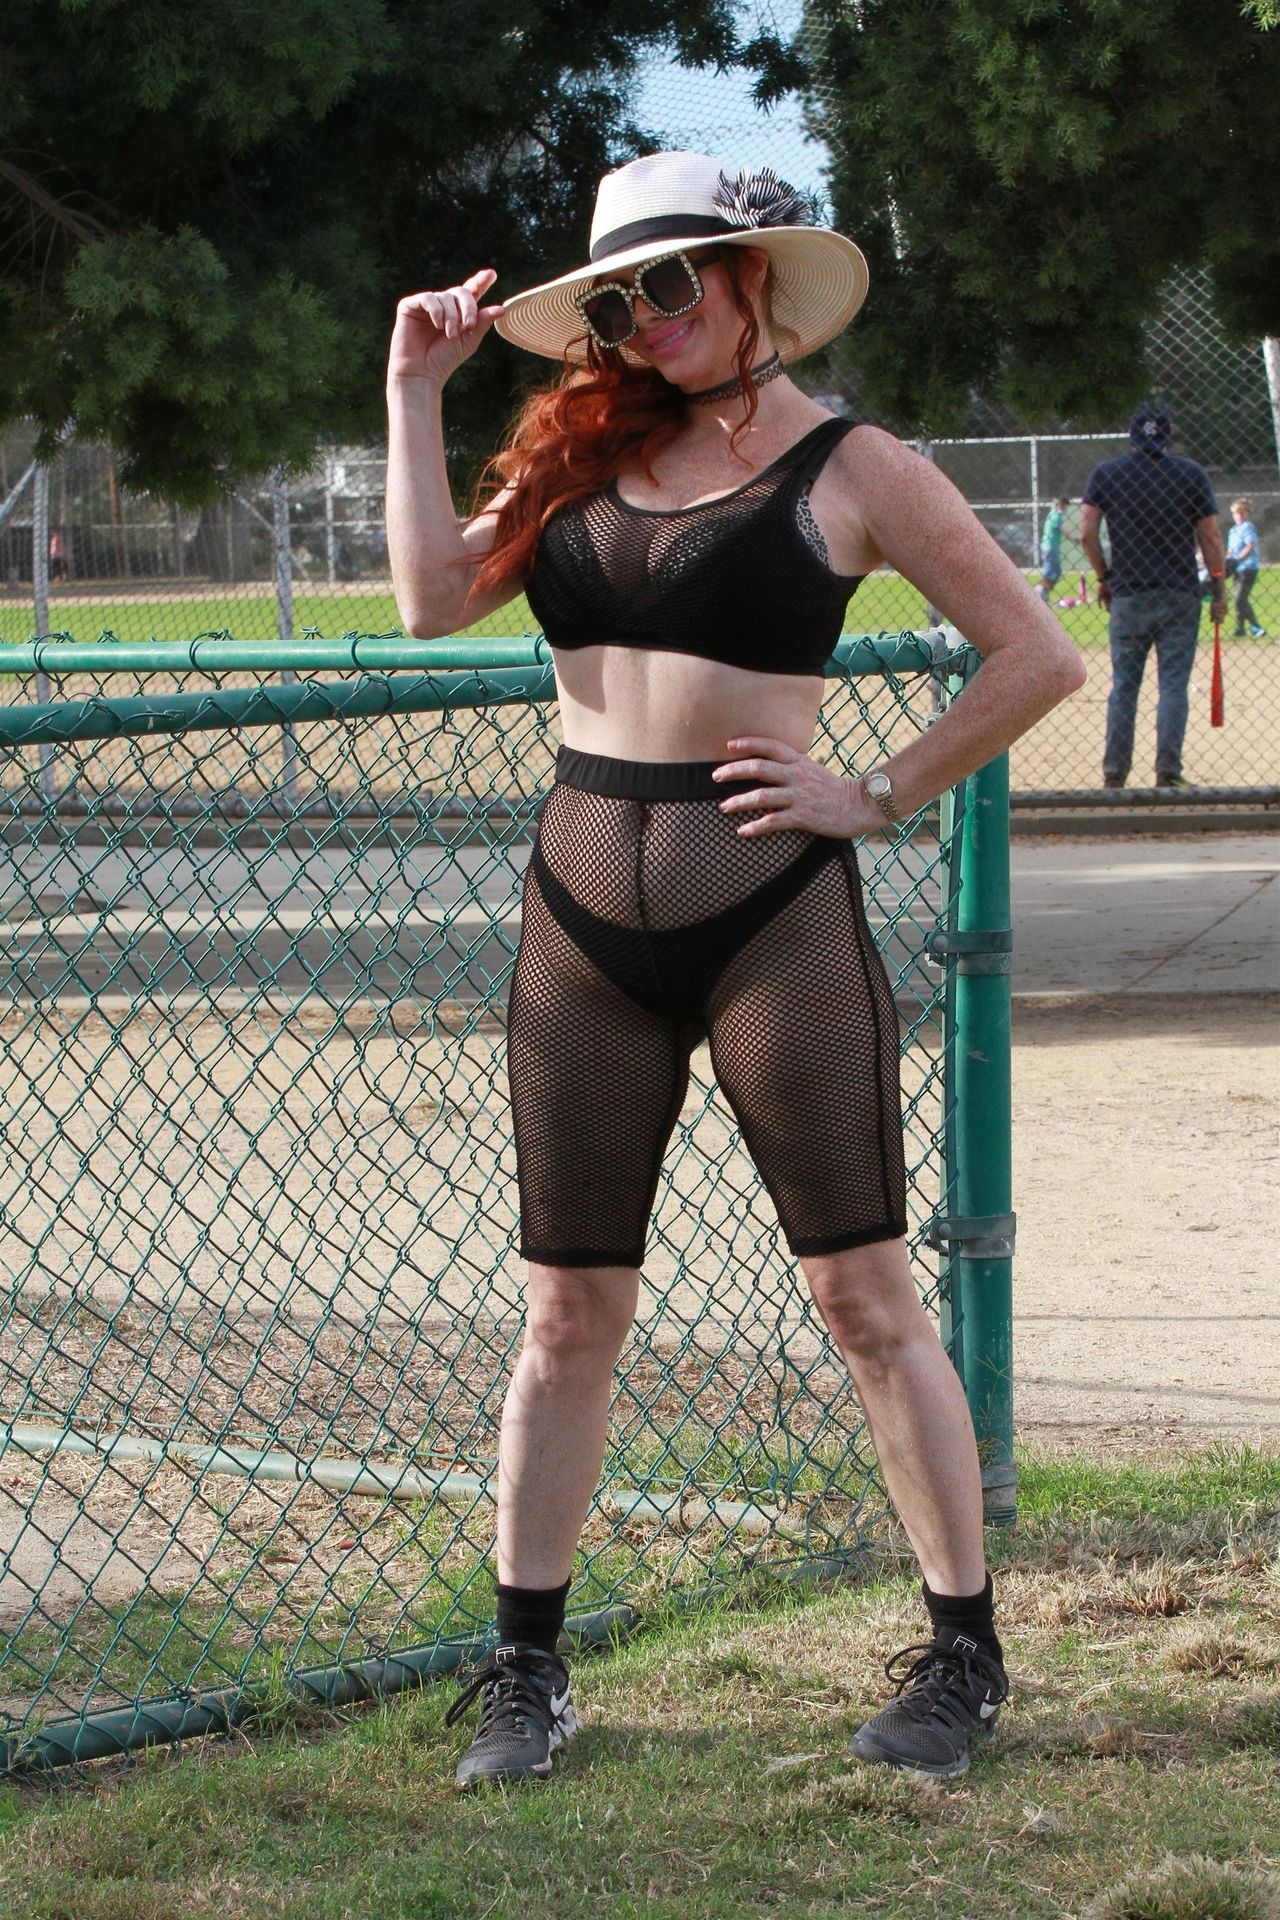 Phoebe Price Gets in a Good Stretch (26 P
hotos)